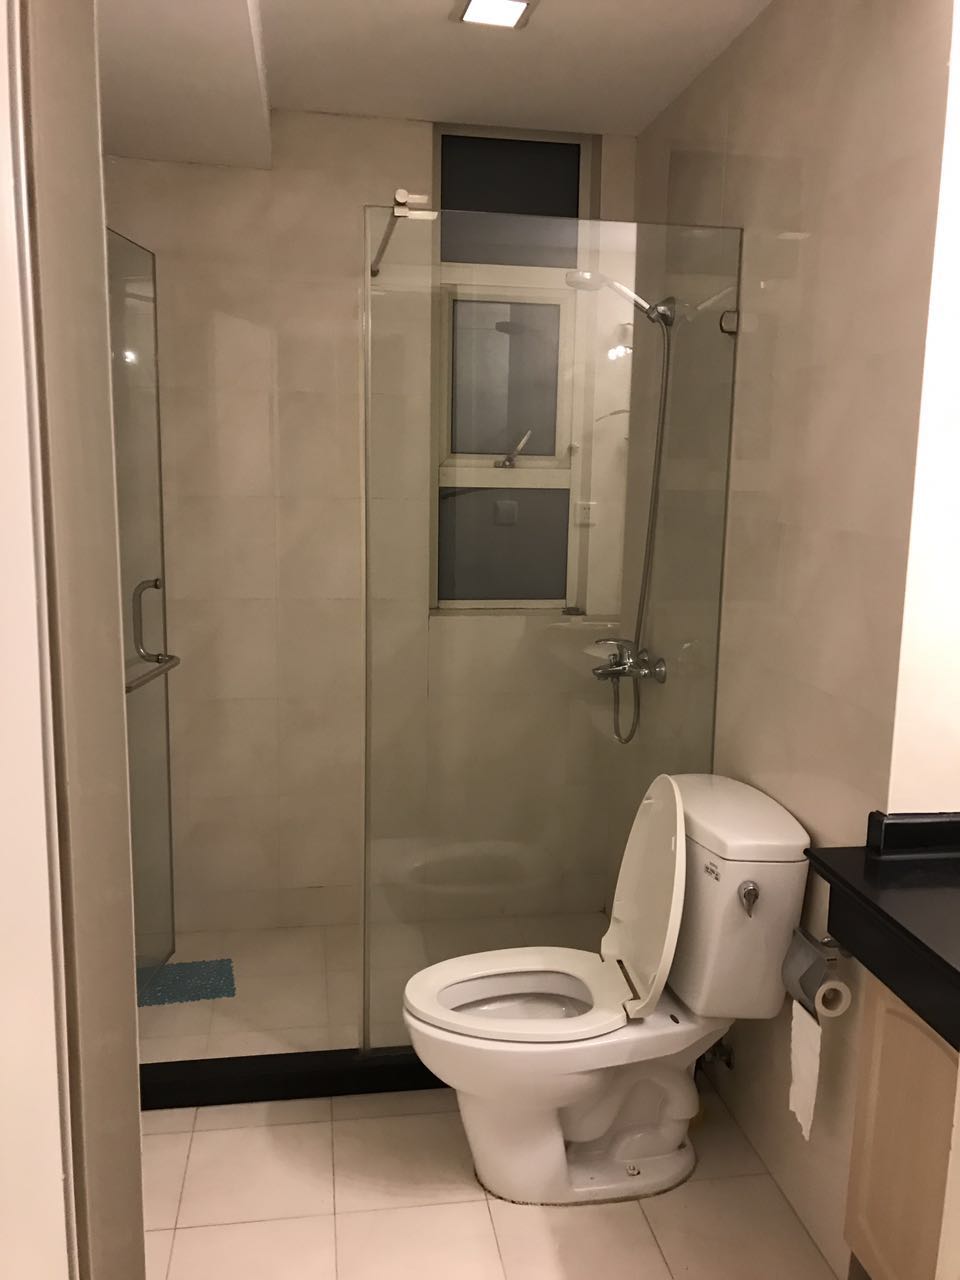 nice apartment for rent Shanghai Spacious and well maintained (176sqm) 3bedroom apartment near Nanjing W Rd in Ladoll for rent